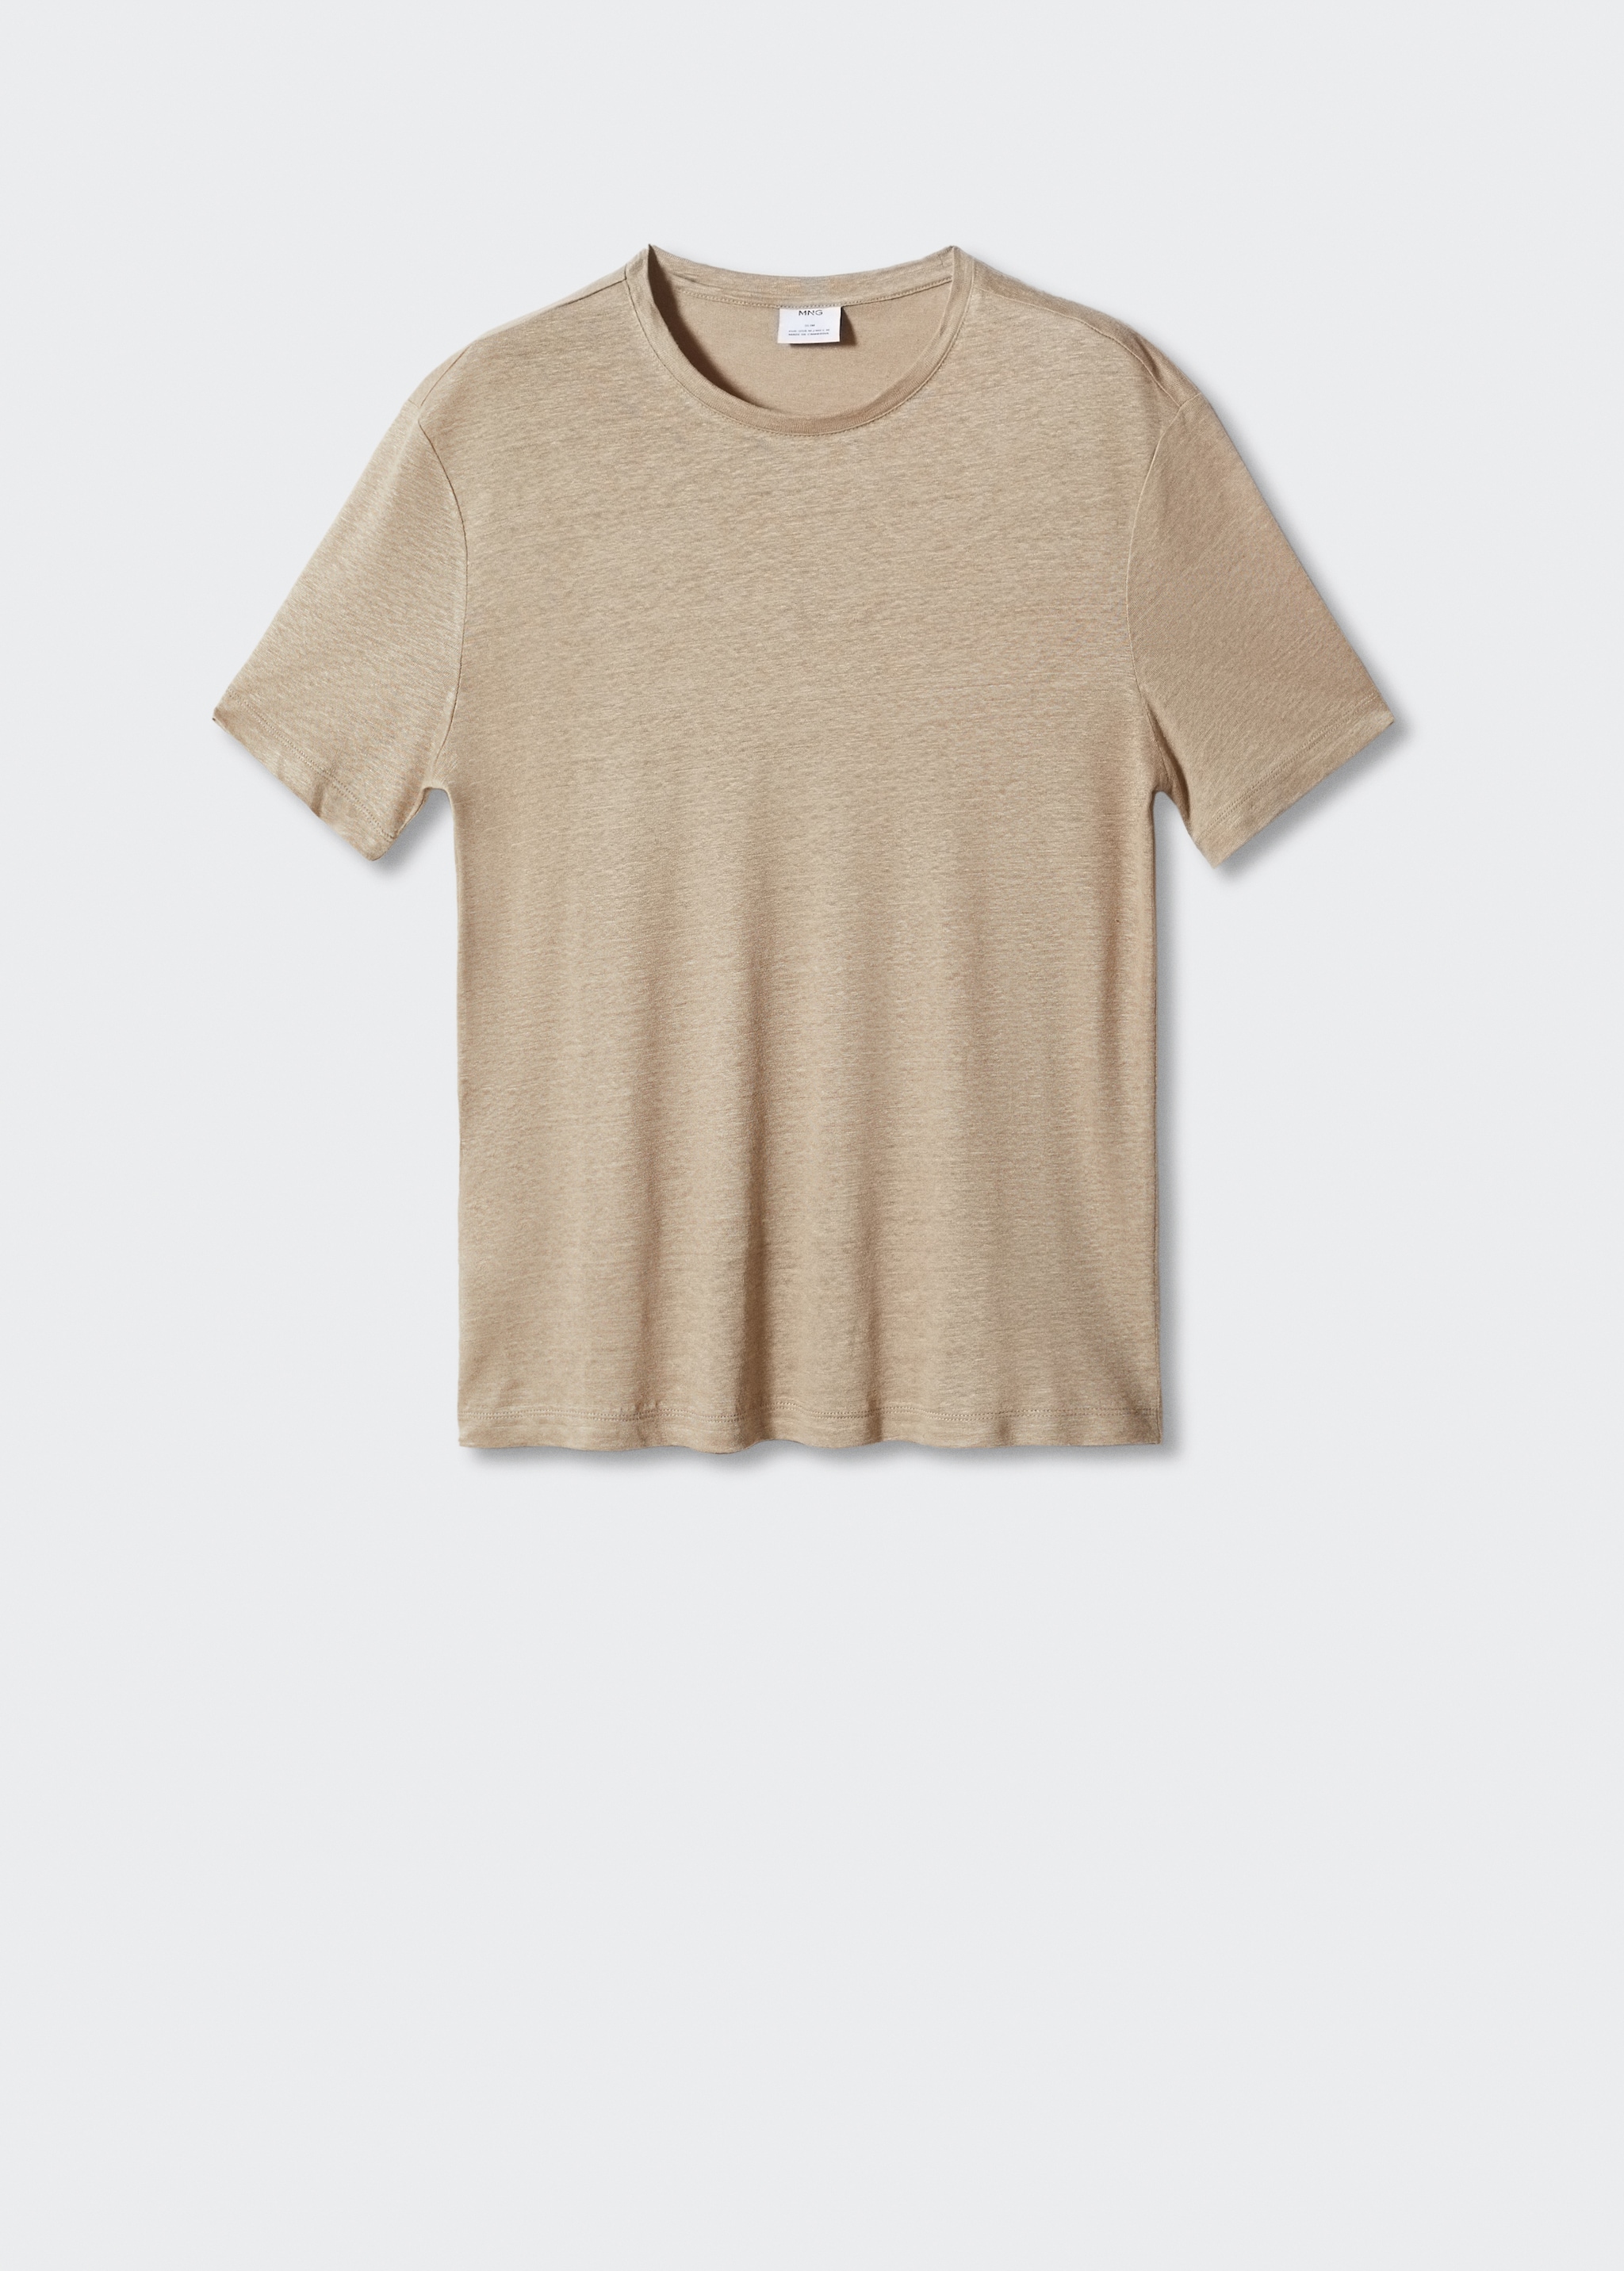 100% linen slim-fit t-shirt - Article without model